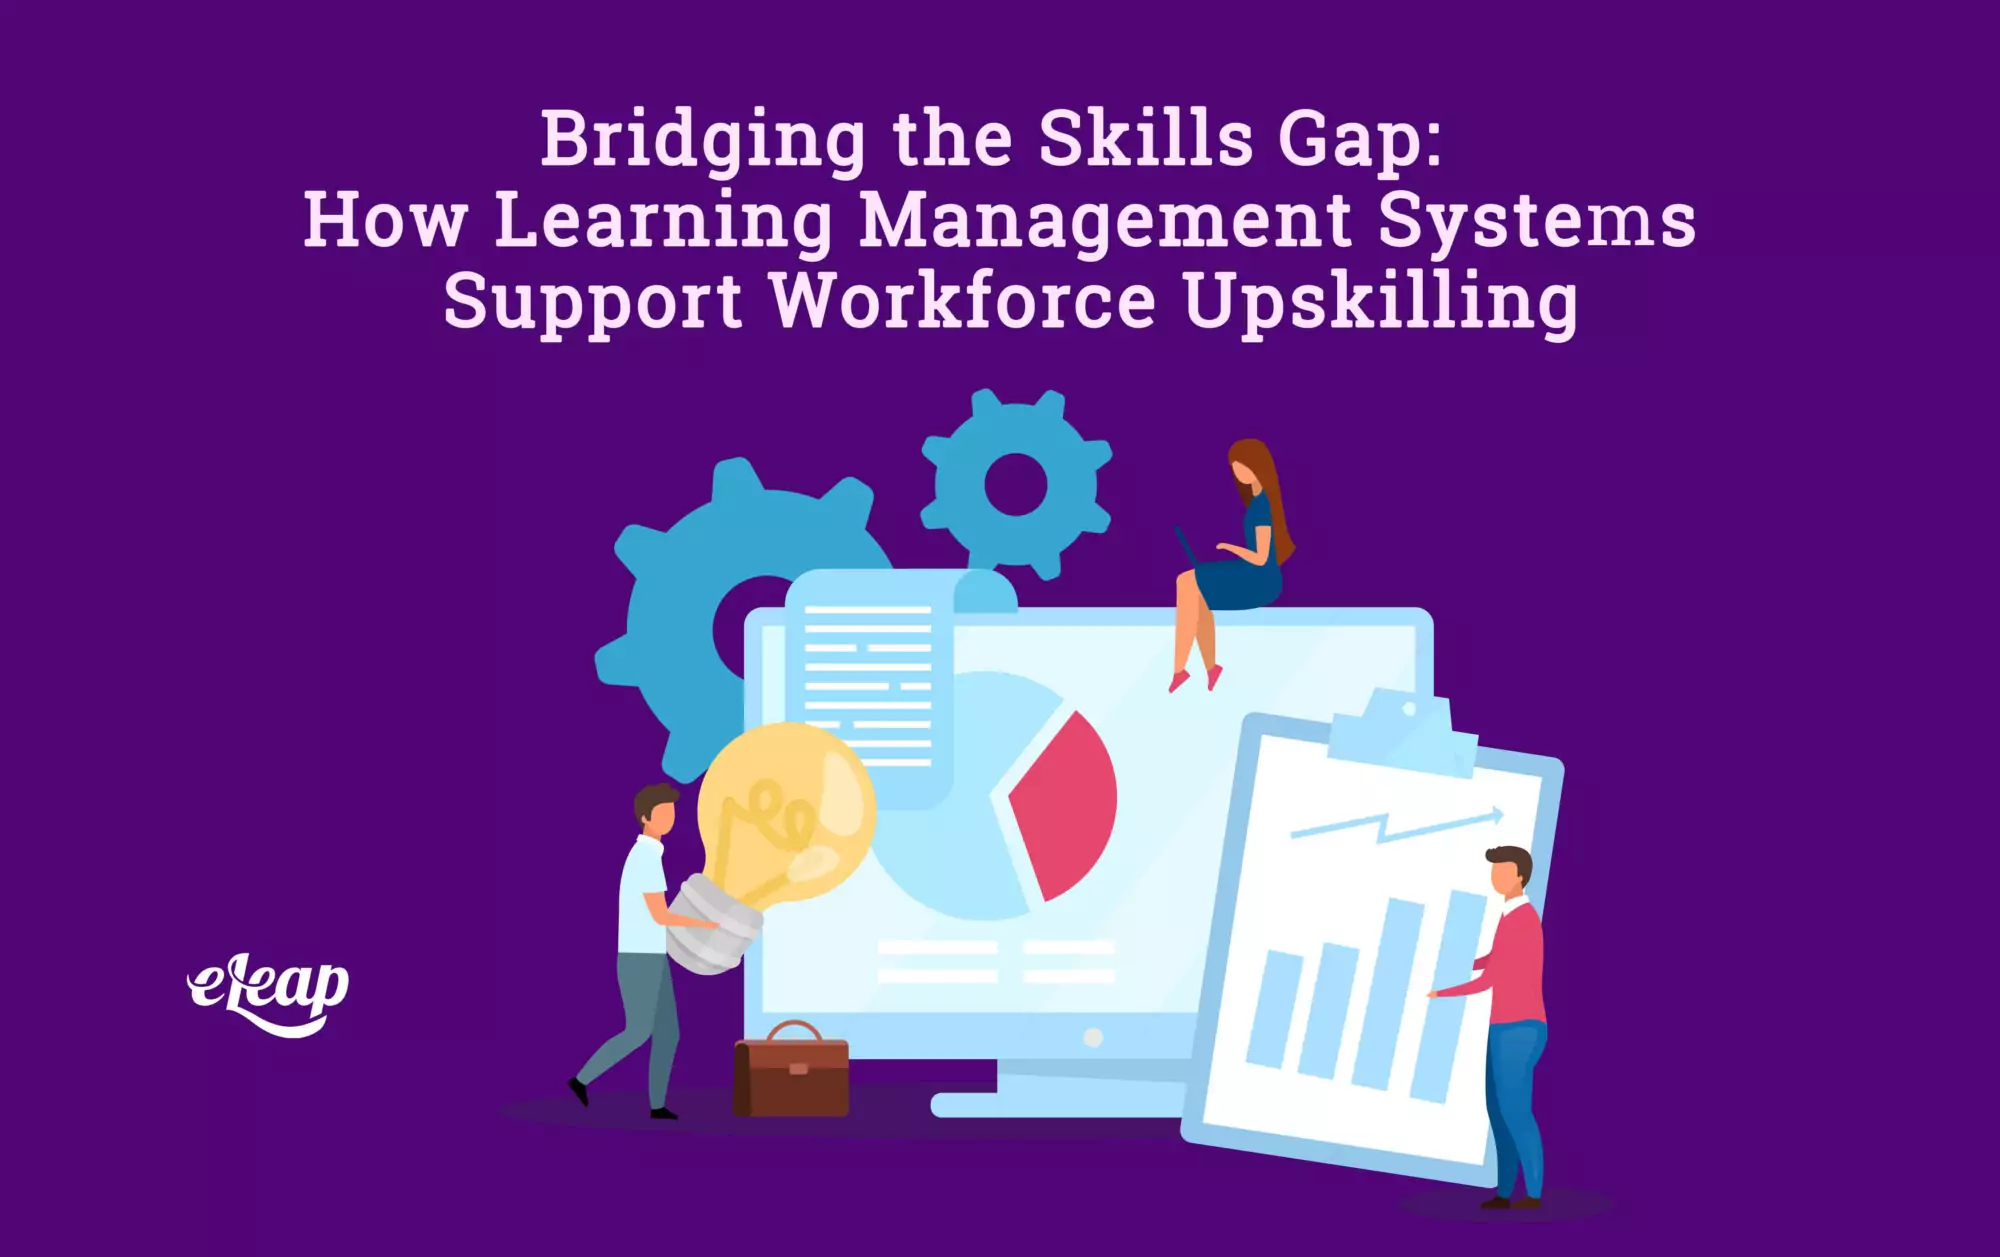 Bridging the Skills Gap: How Learning Management Systems Support Workforce Upskilling